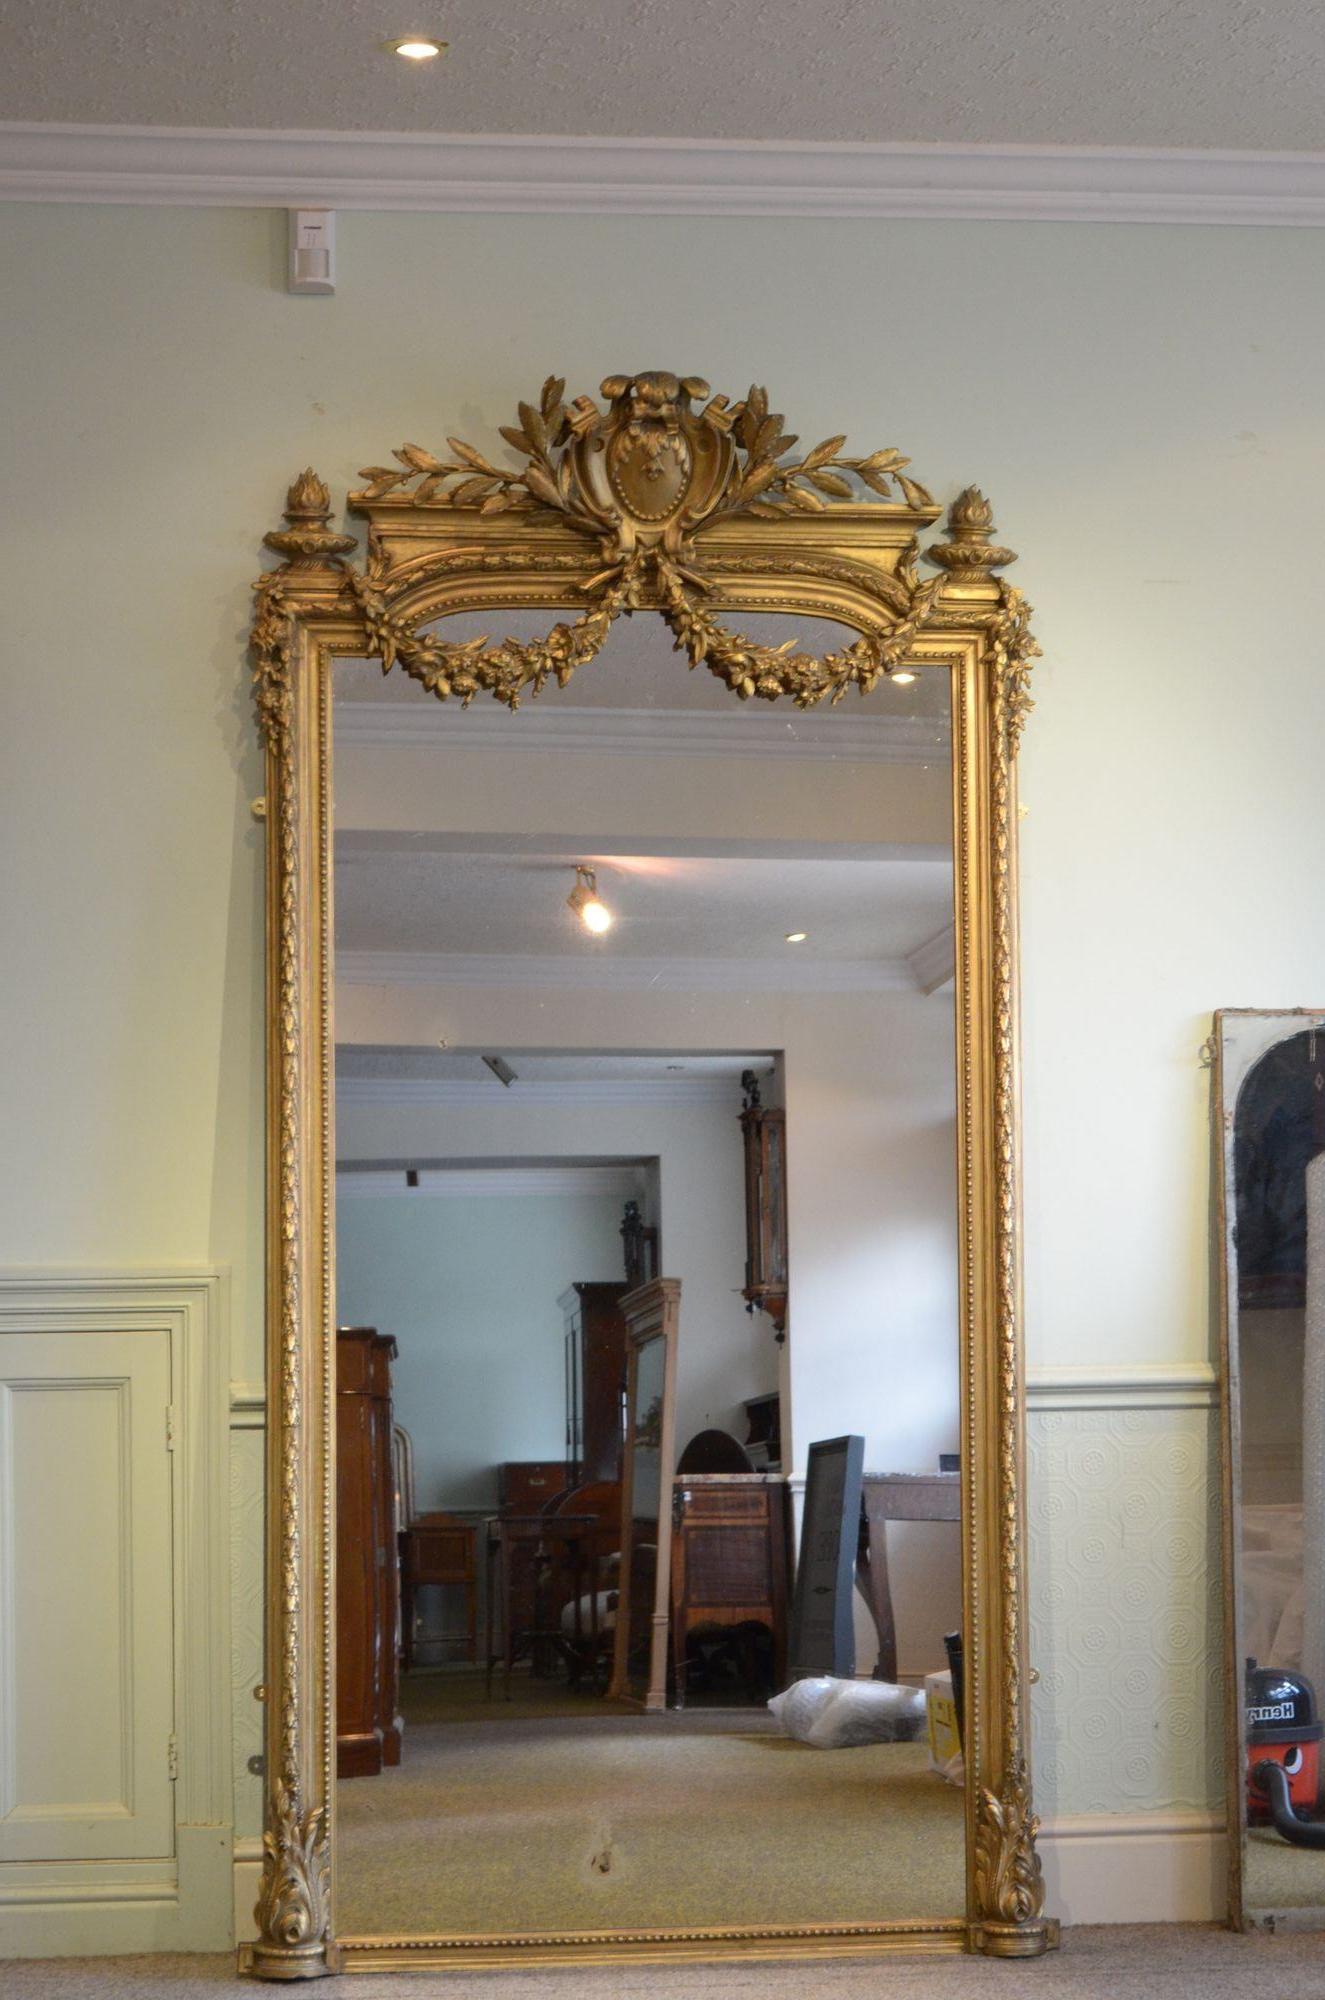 Sn5388 outstanding 19th century French giltwood mirror, having original glass with some foxing and air bubbles in gilded and moulded frame with beaded edge, laurel leaf carving, acanthus scrolls to the base and finely carved crest with floral swags